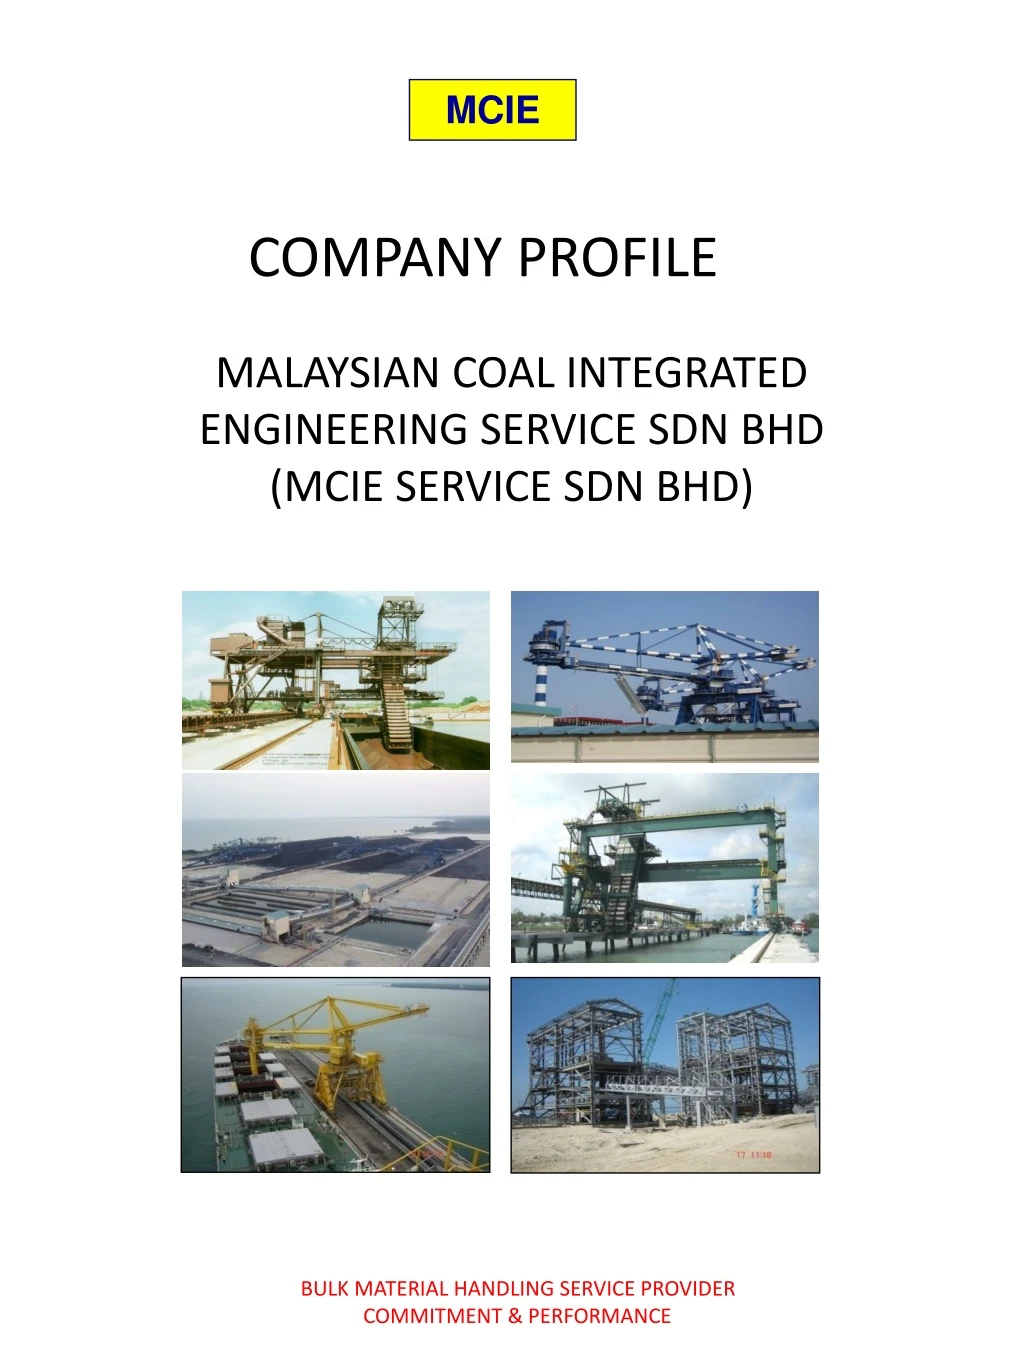 malaysian coal integrated engineering service sdn bhd mcie service sdn bhd